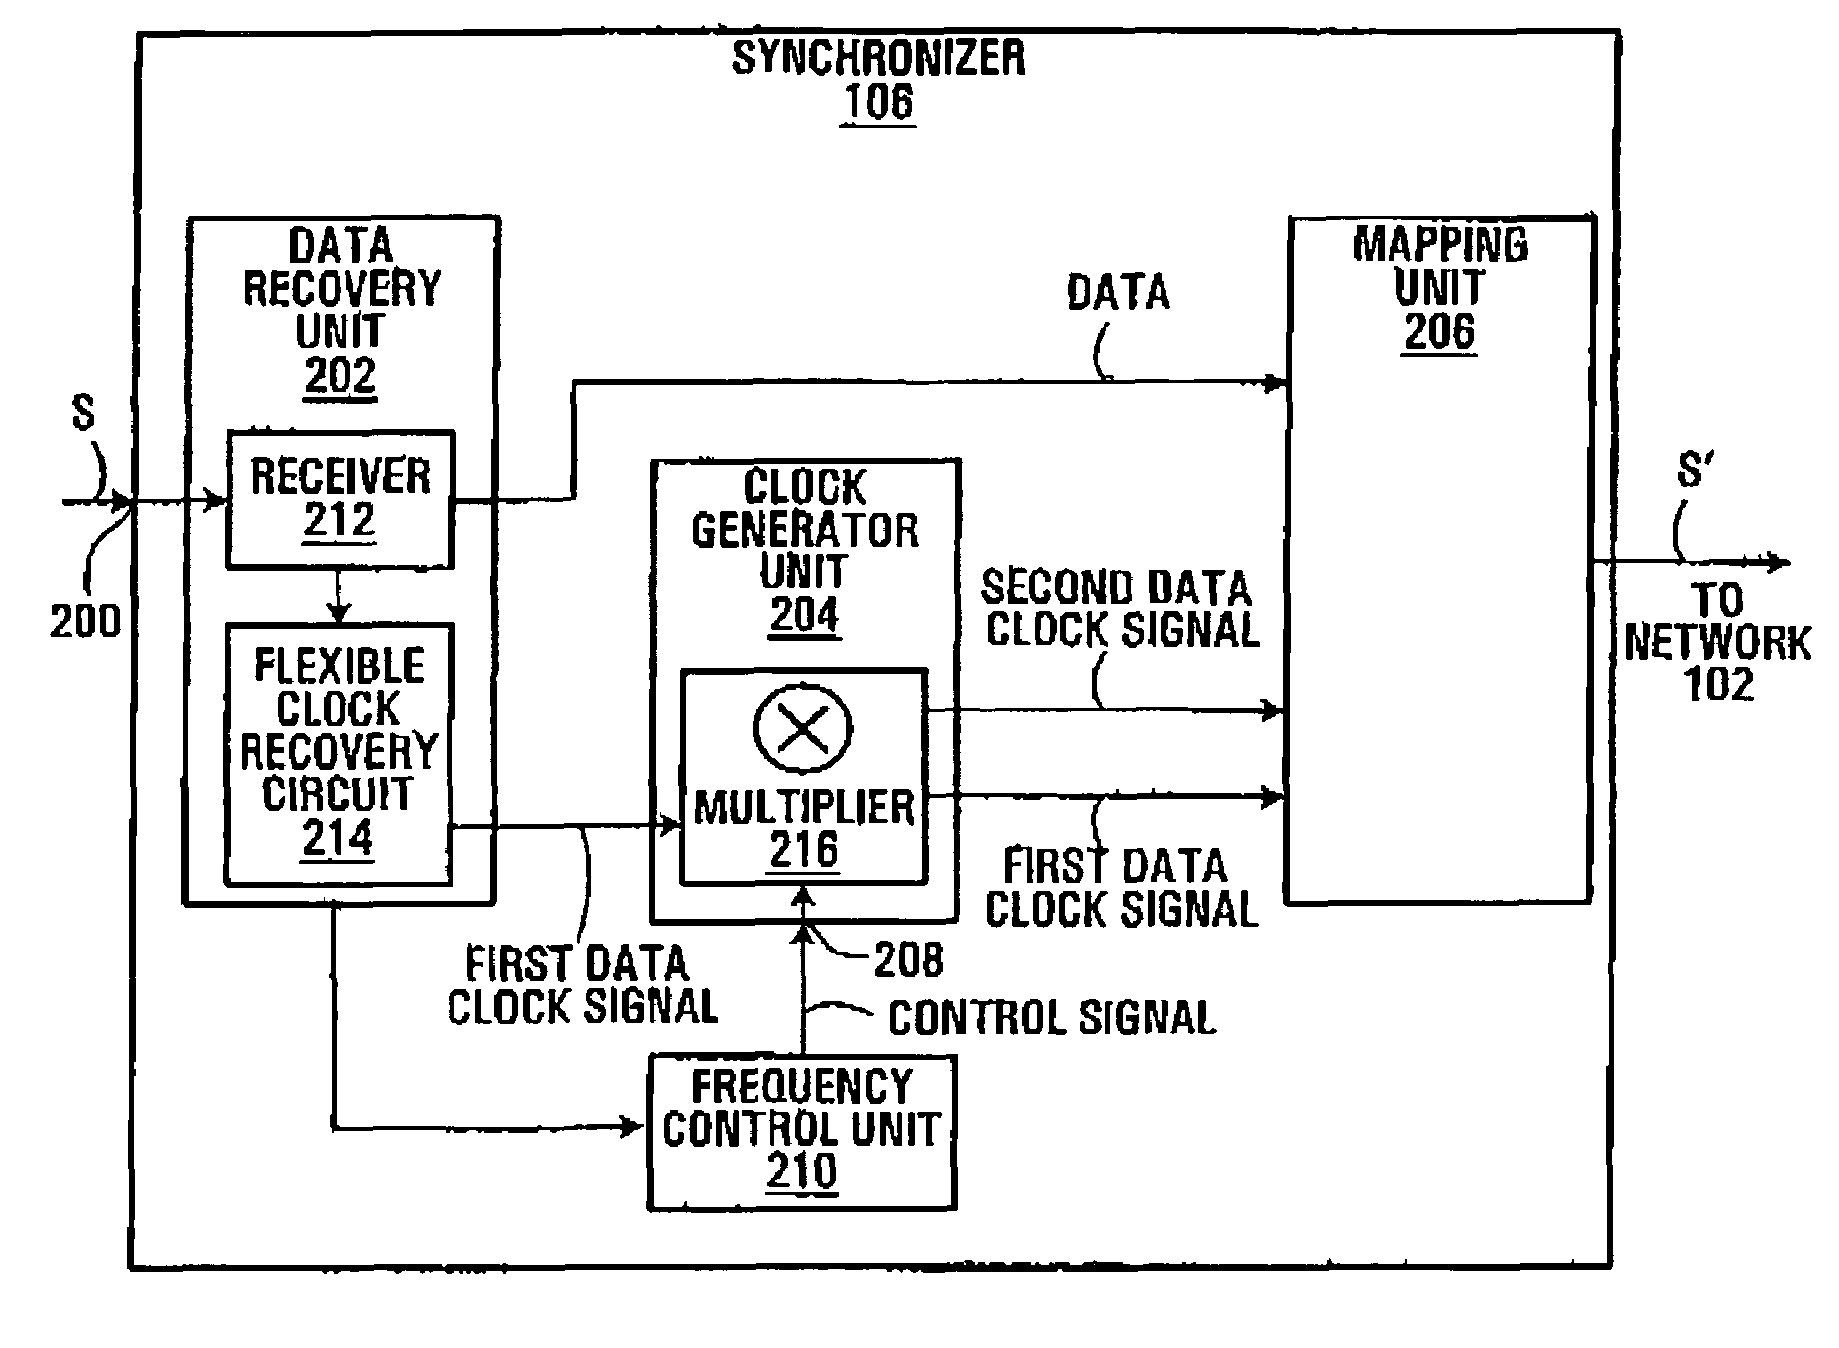 Method and apparatus for transmitting arbitrary electrical signals over a data network